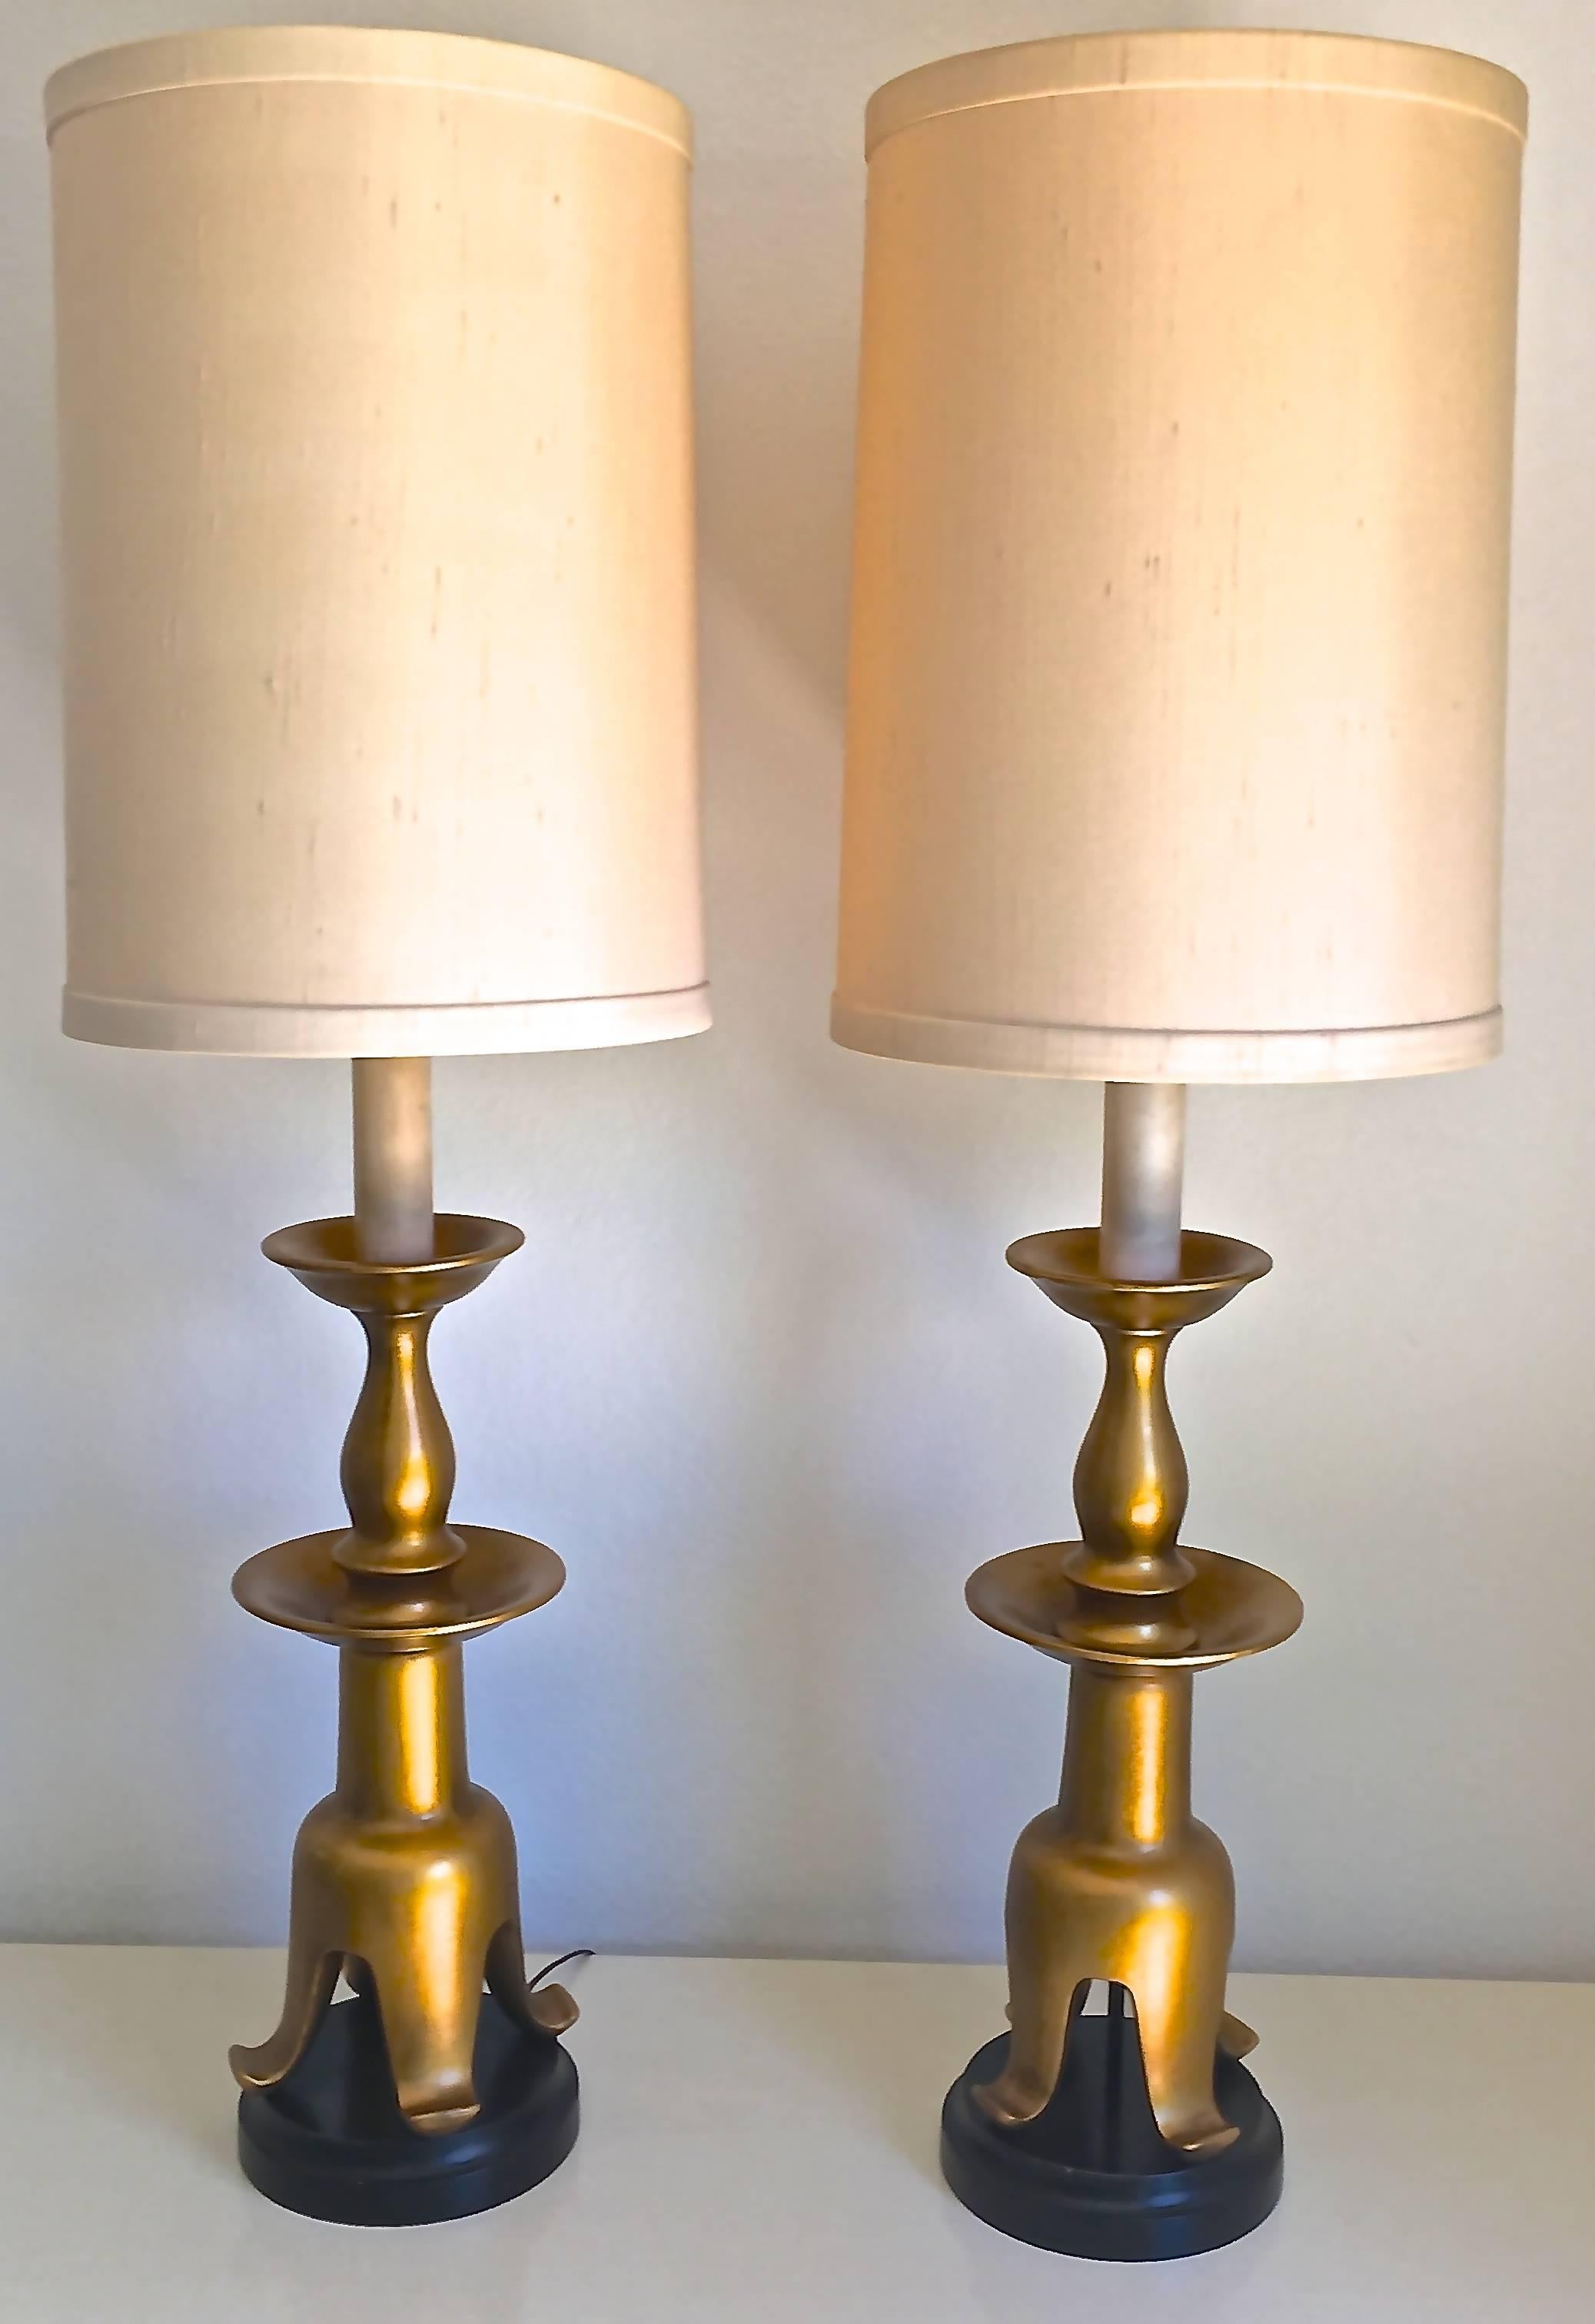 Attributed to James Mont, this pair of handsome tiered giltwood lamps with cat's paw bases on ebony risers are the perfect transitional lamps. Modern simplicity, chinoiserie details, Hollywood Regency glamour, these would be striking in any